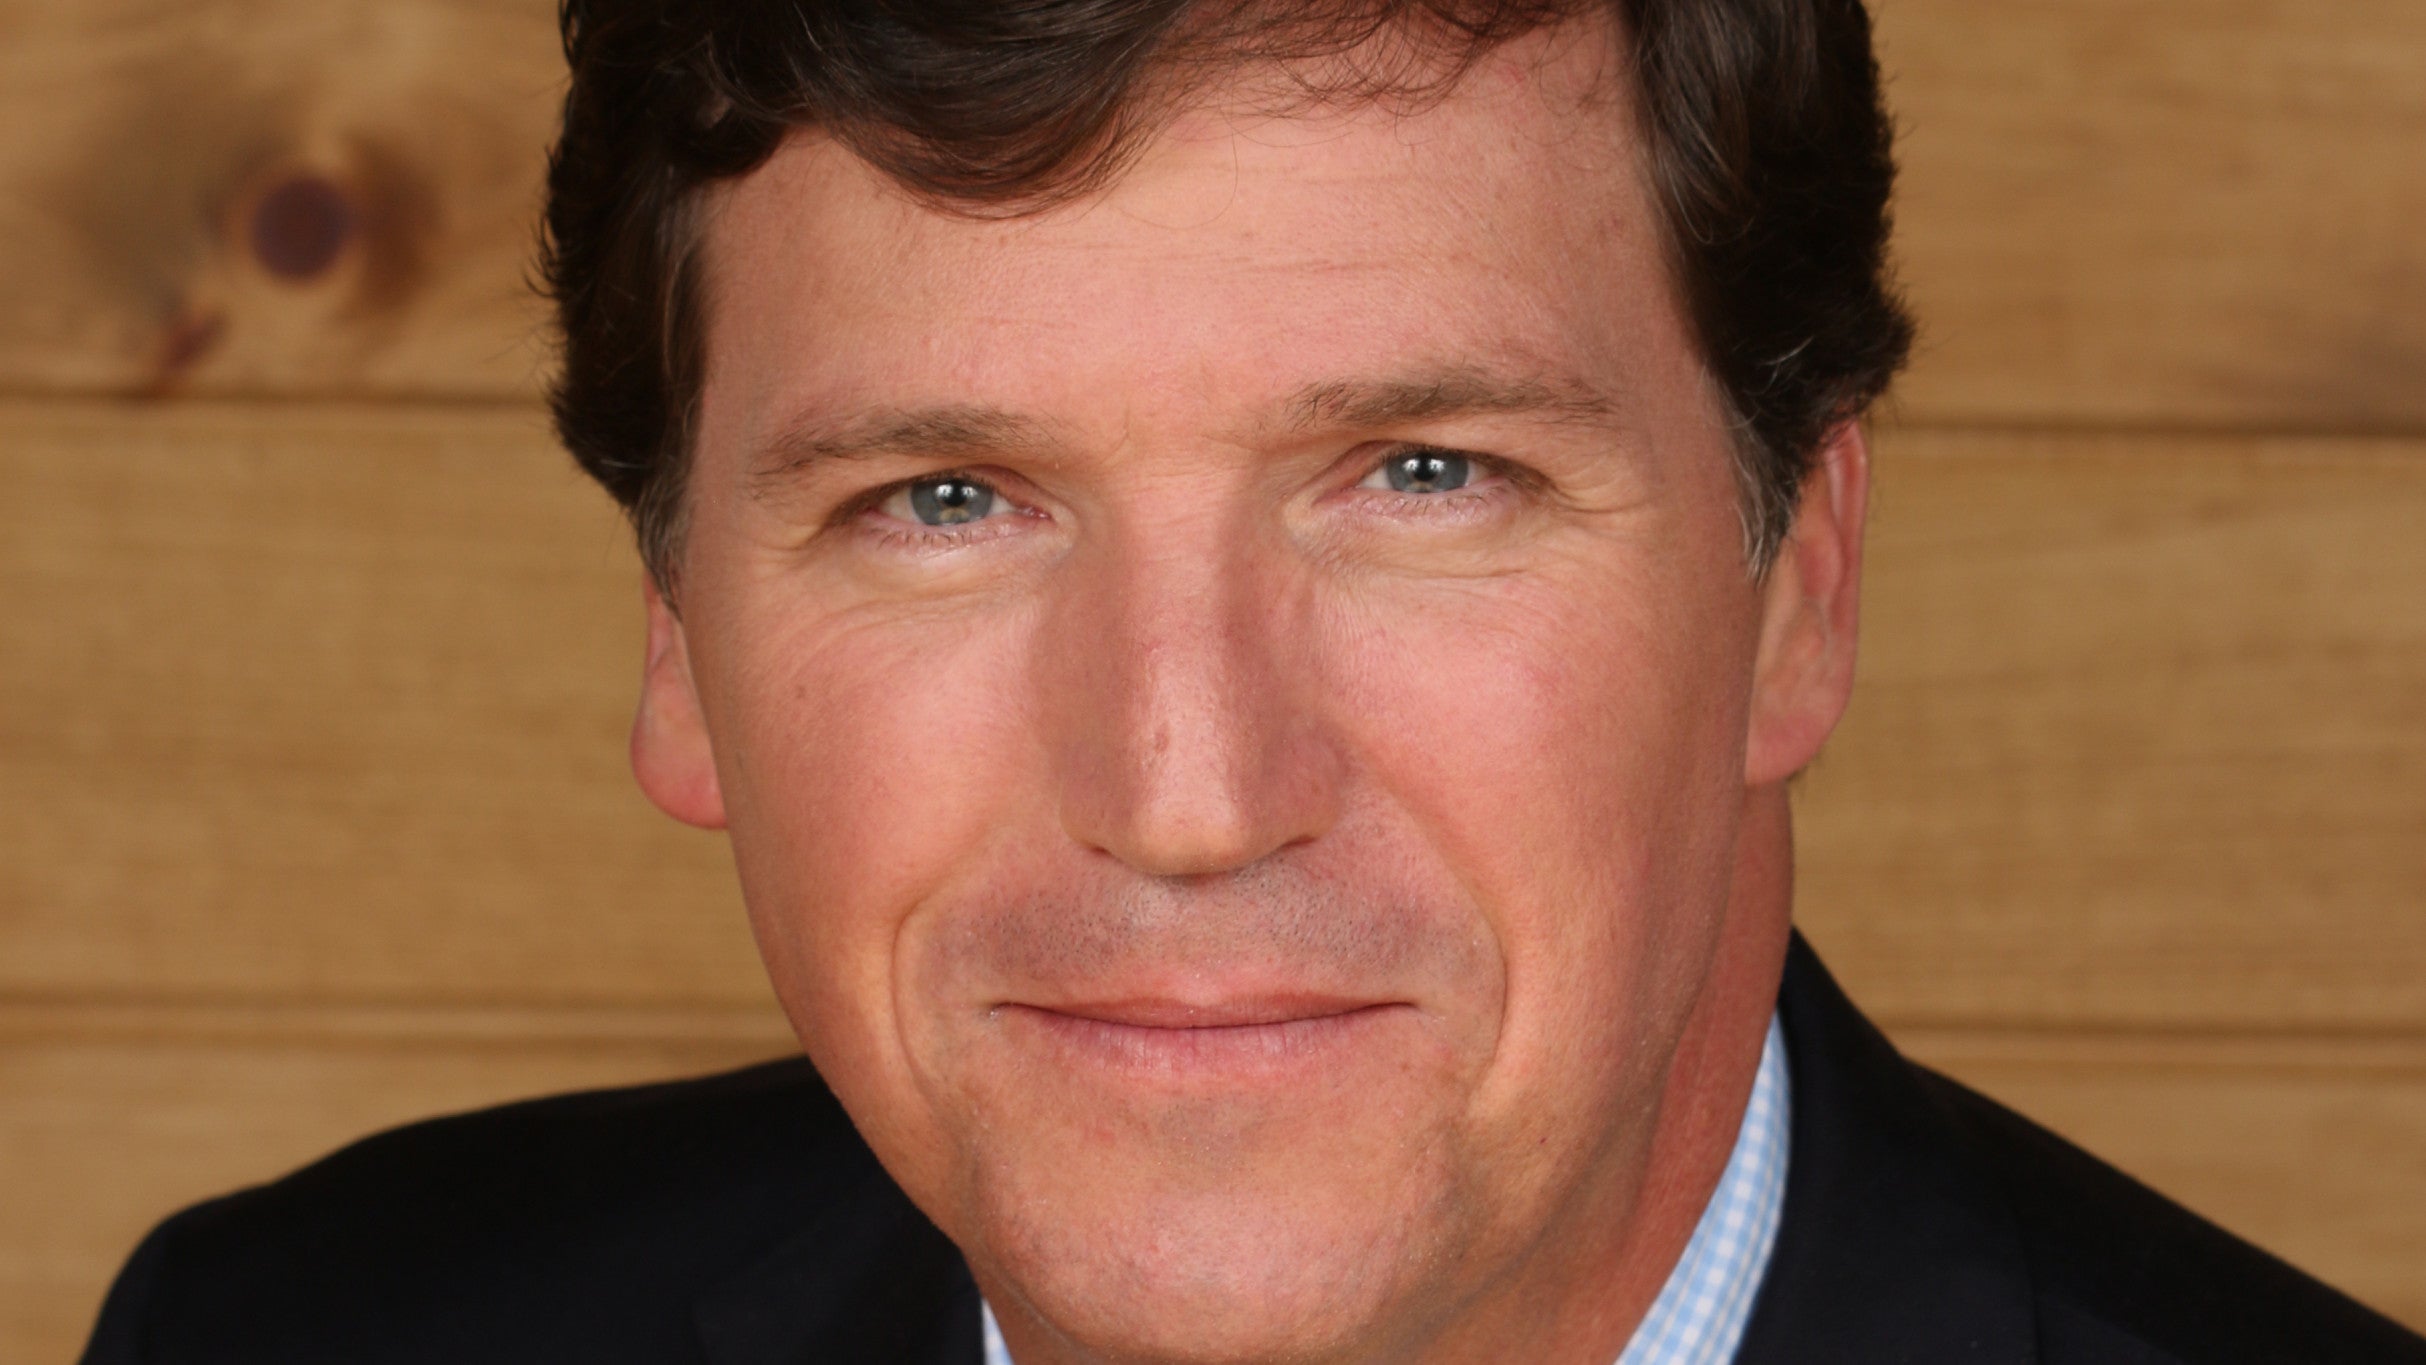 Tucker Carlson Live in Reading promo photo for Exclusive presale offer code